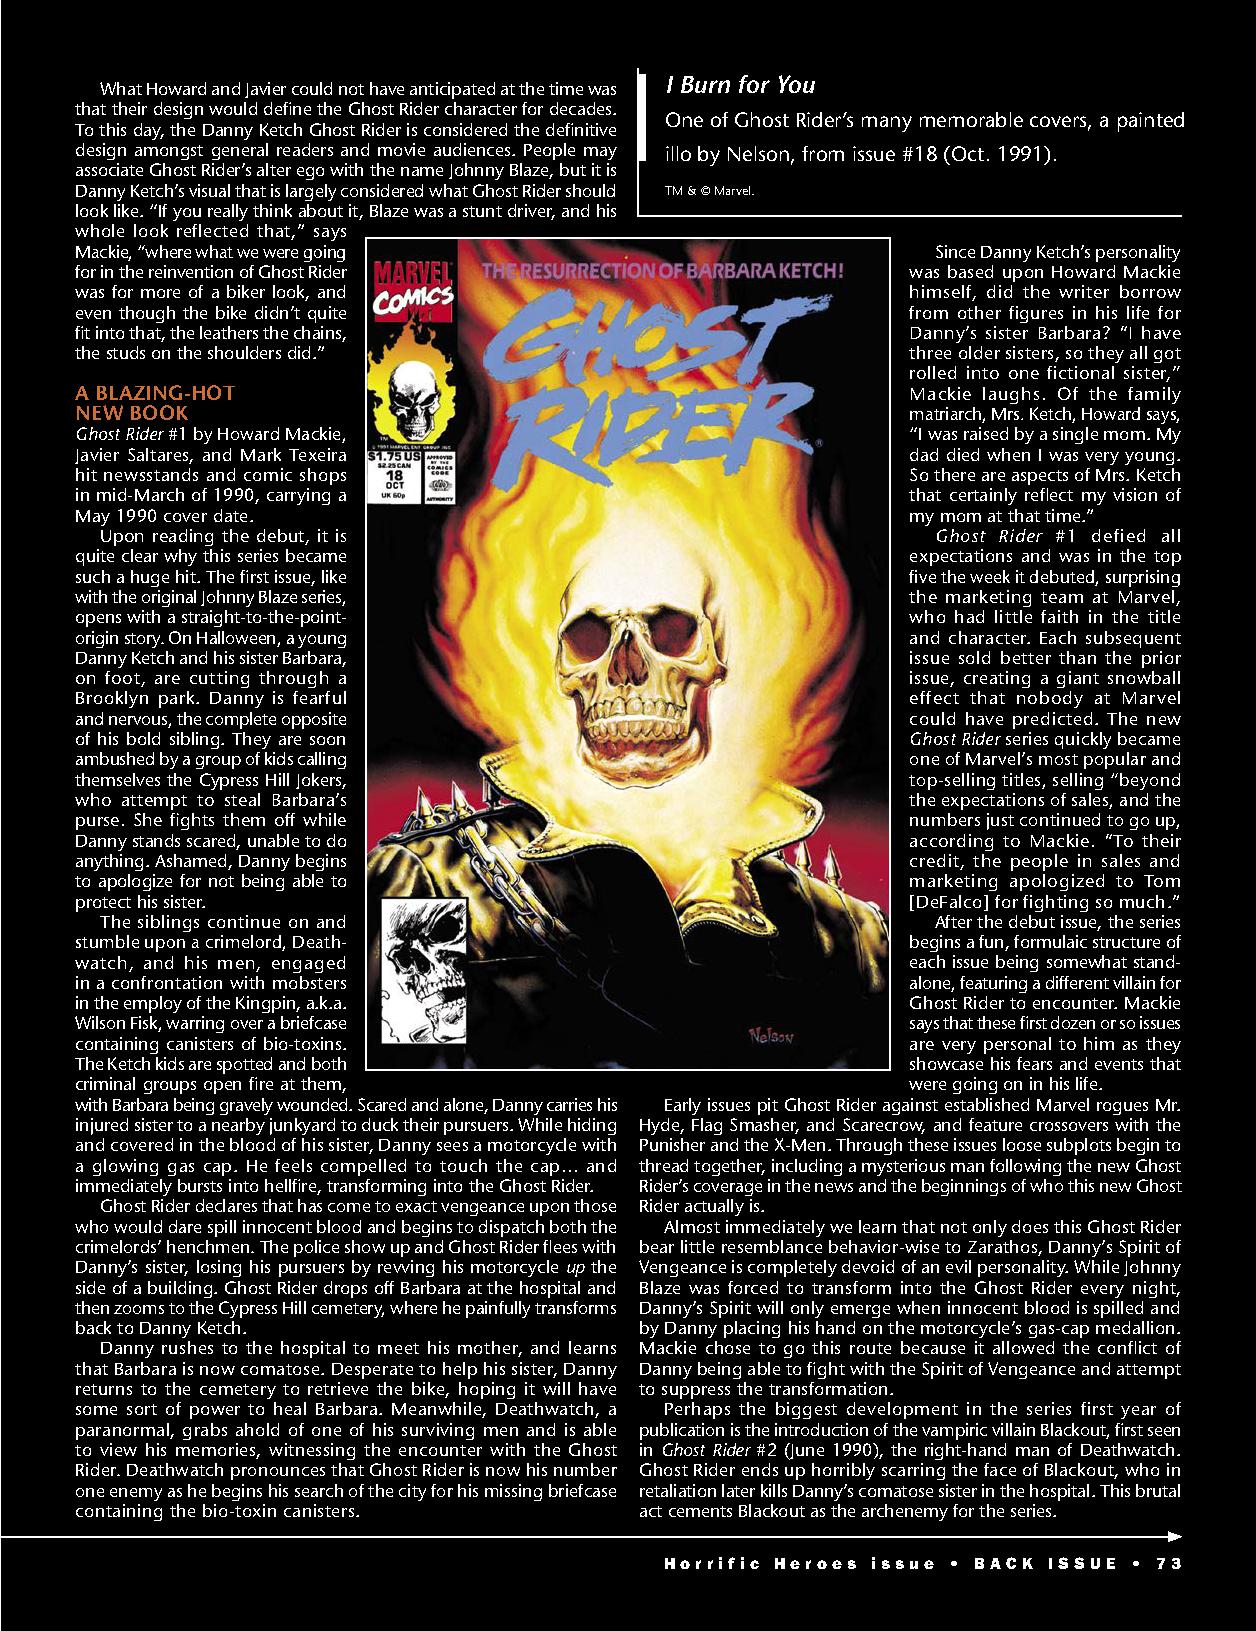 Read online Back Issue comic -  Issue #124 - 75